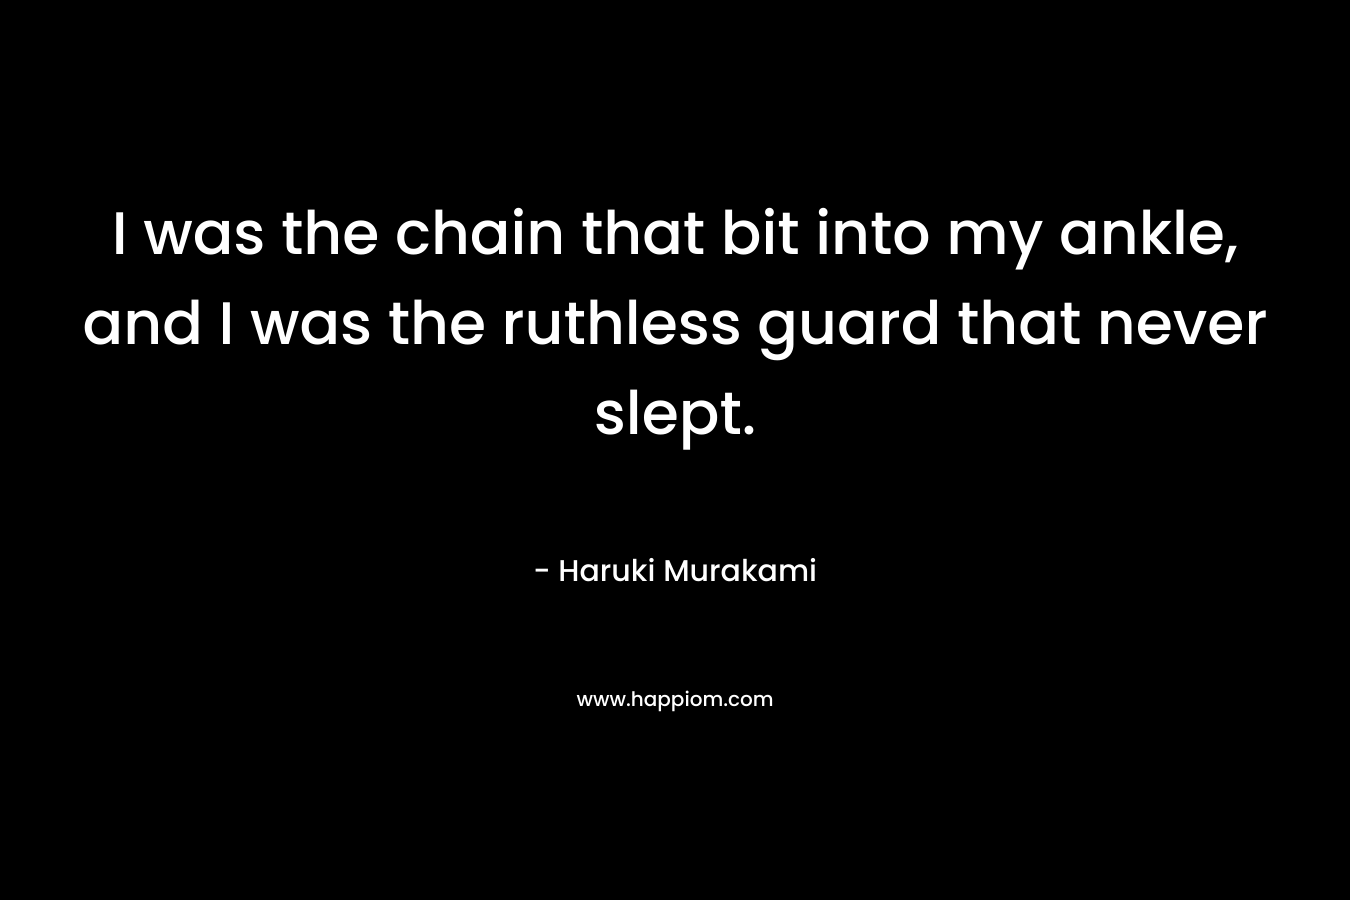 I was the chain that bit into my ankle, and I was the ruthless guard that never slept. – Haruki Murakami